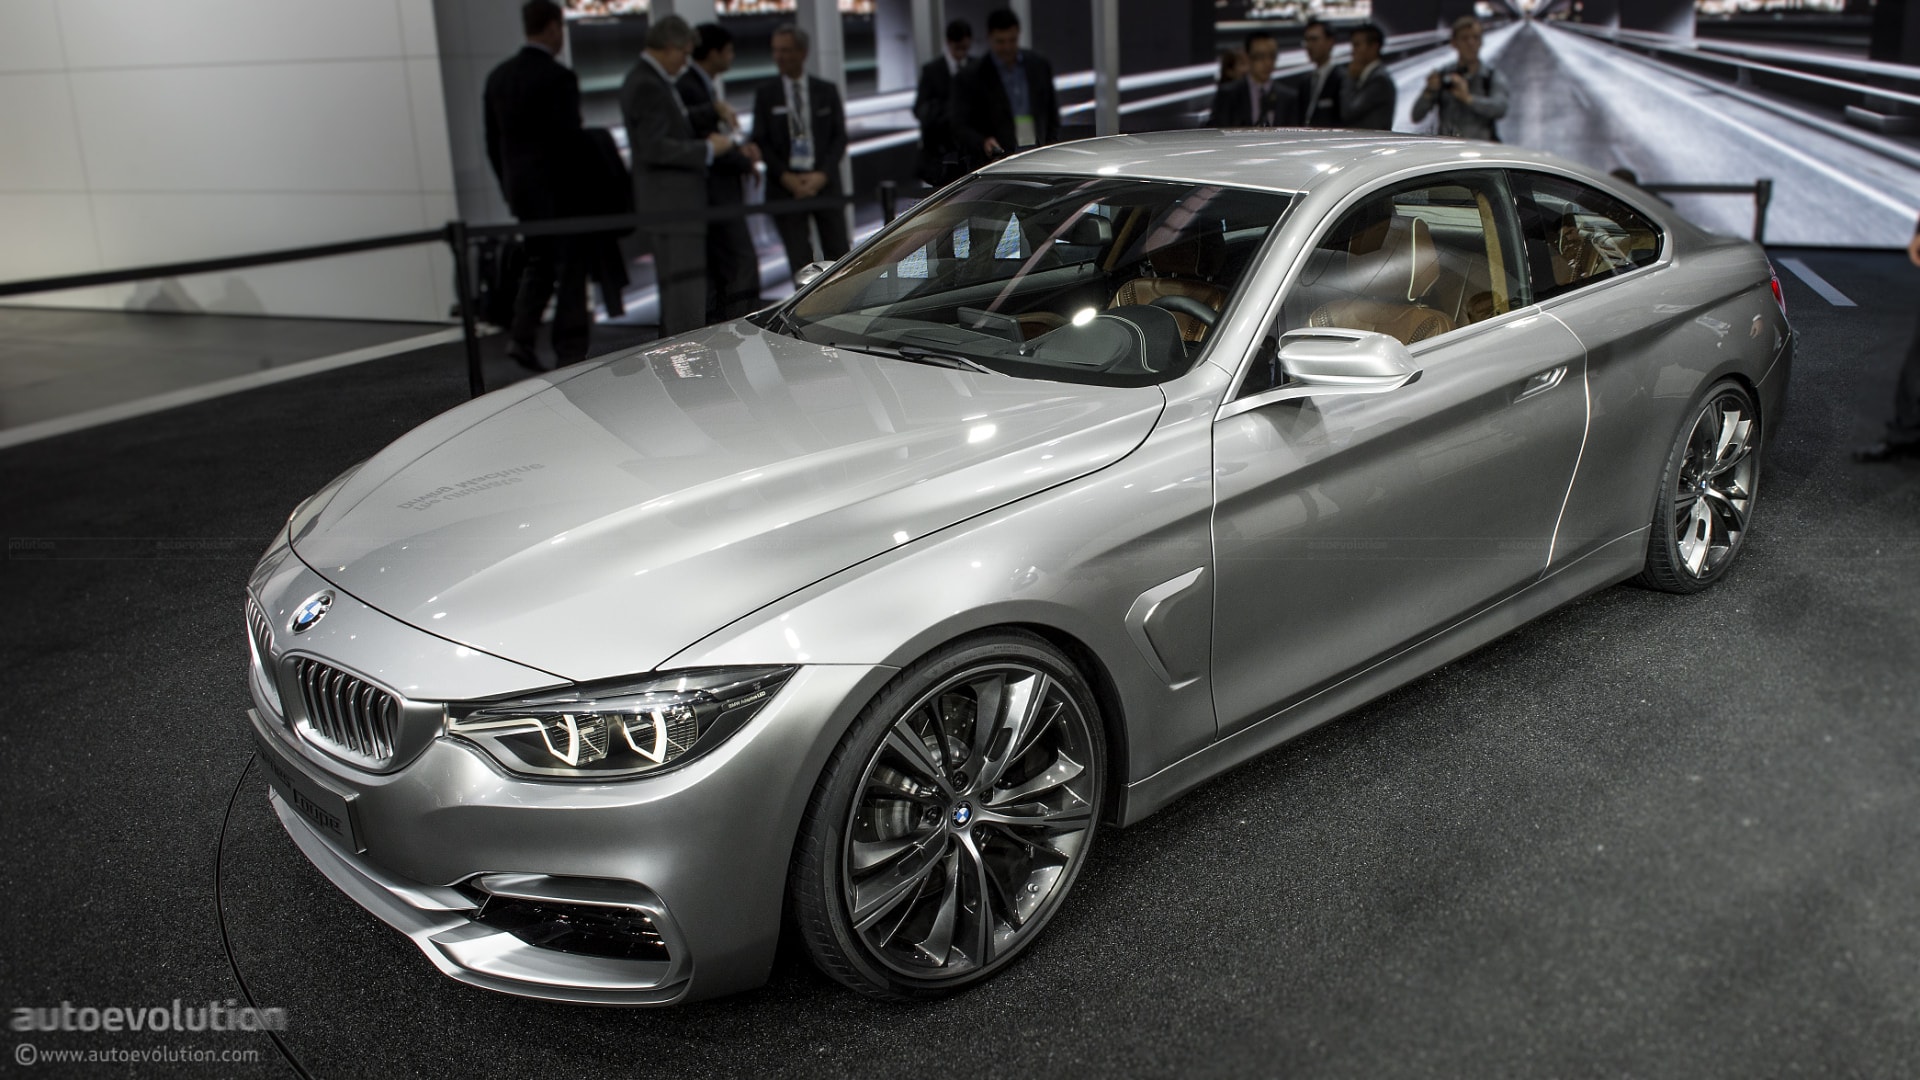 https://s1.cdn.autoevolution.com/images/news/the-new-bmw-f32-4-series-coupe-gets-new-options-56341_1.jpg